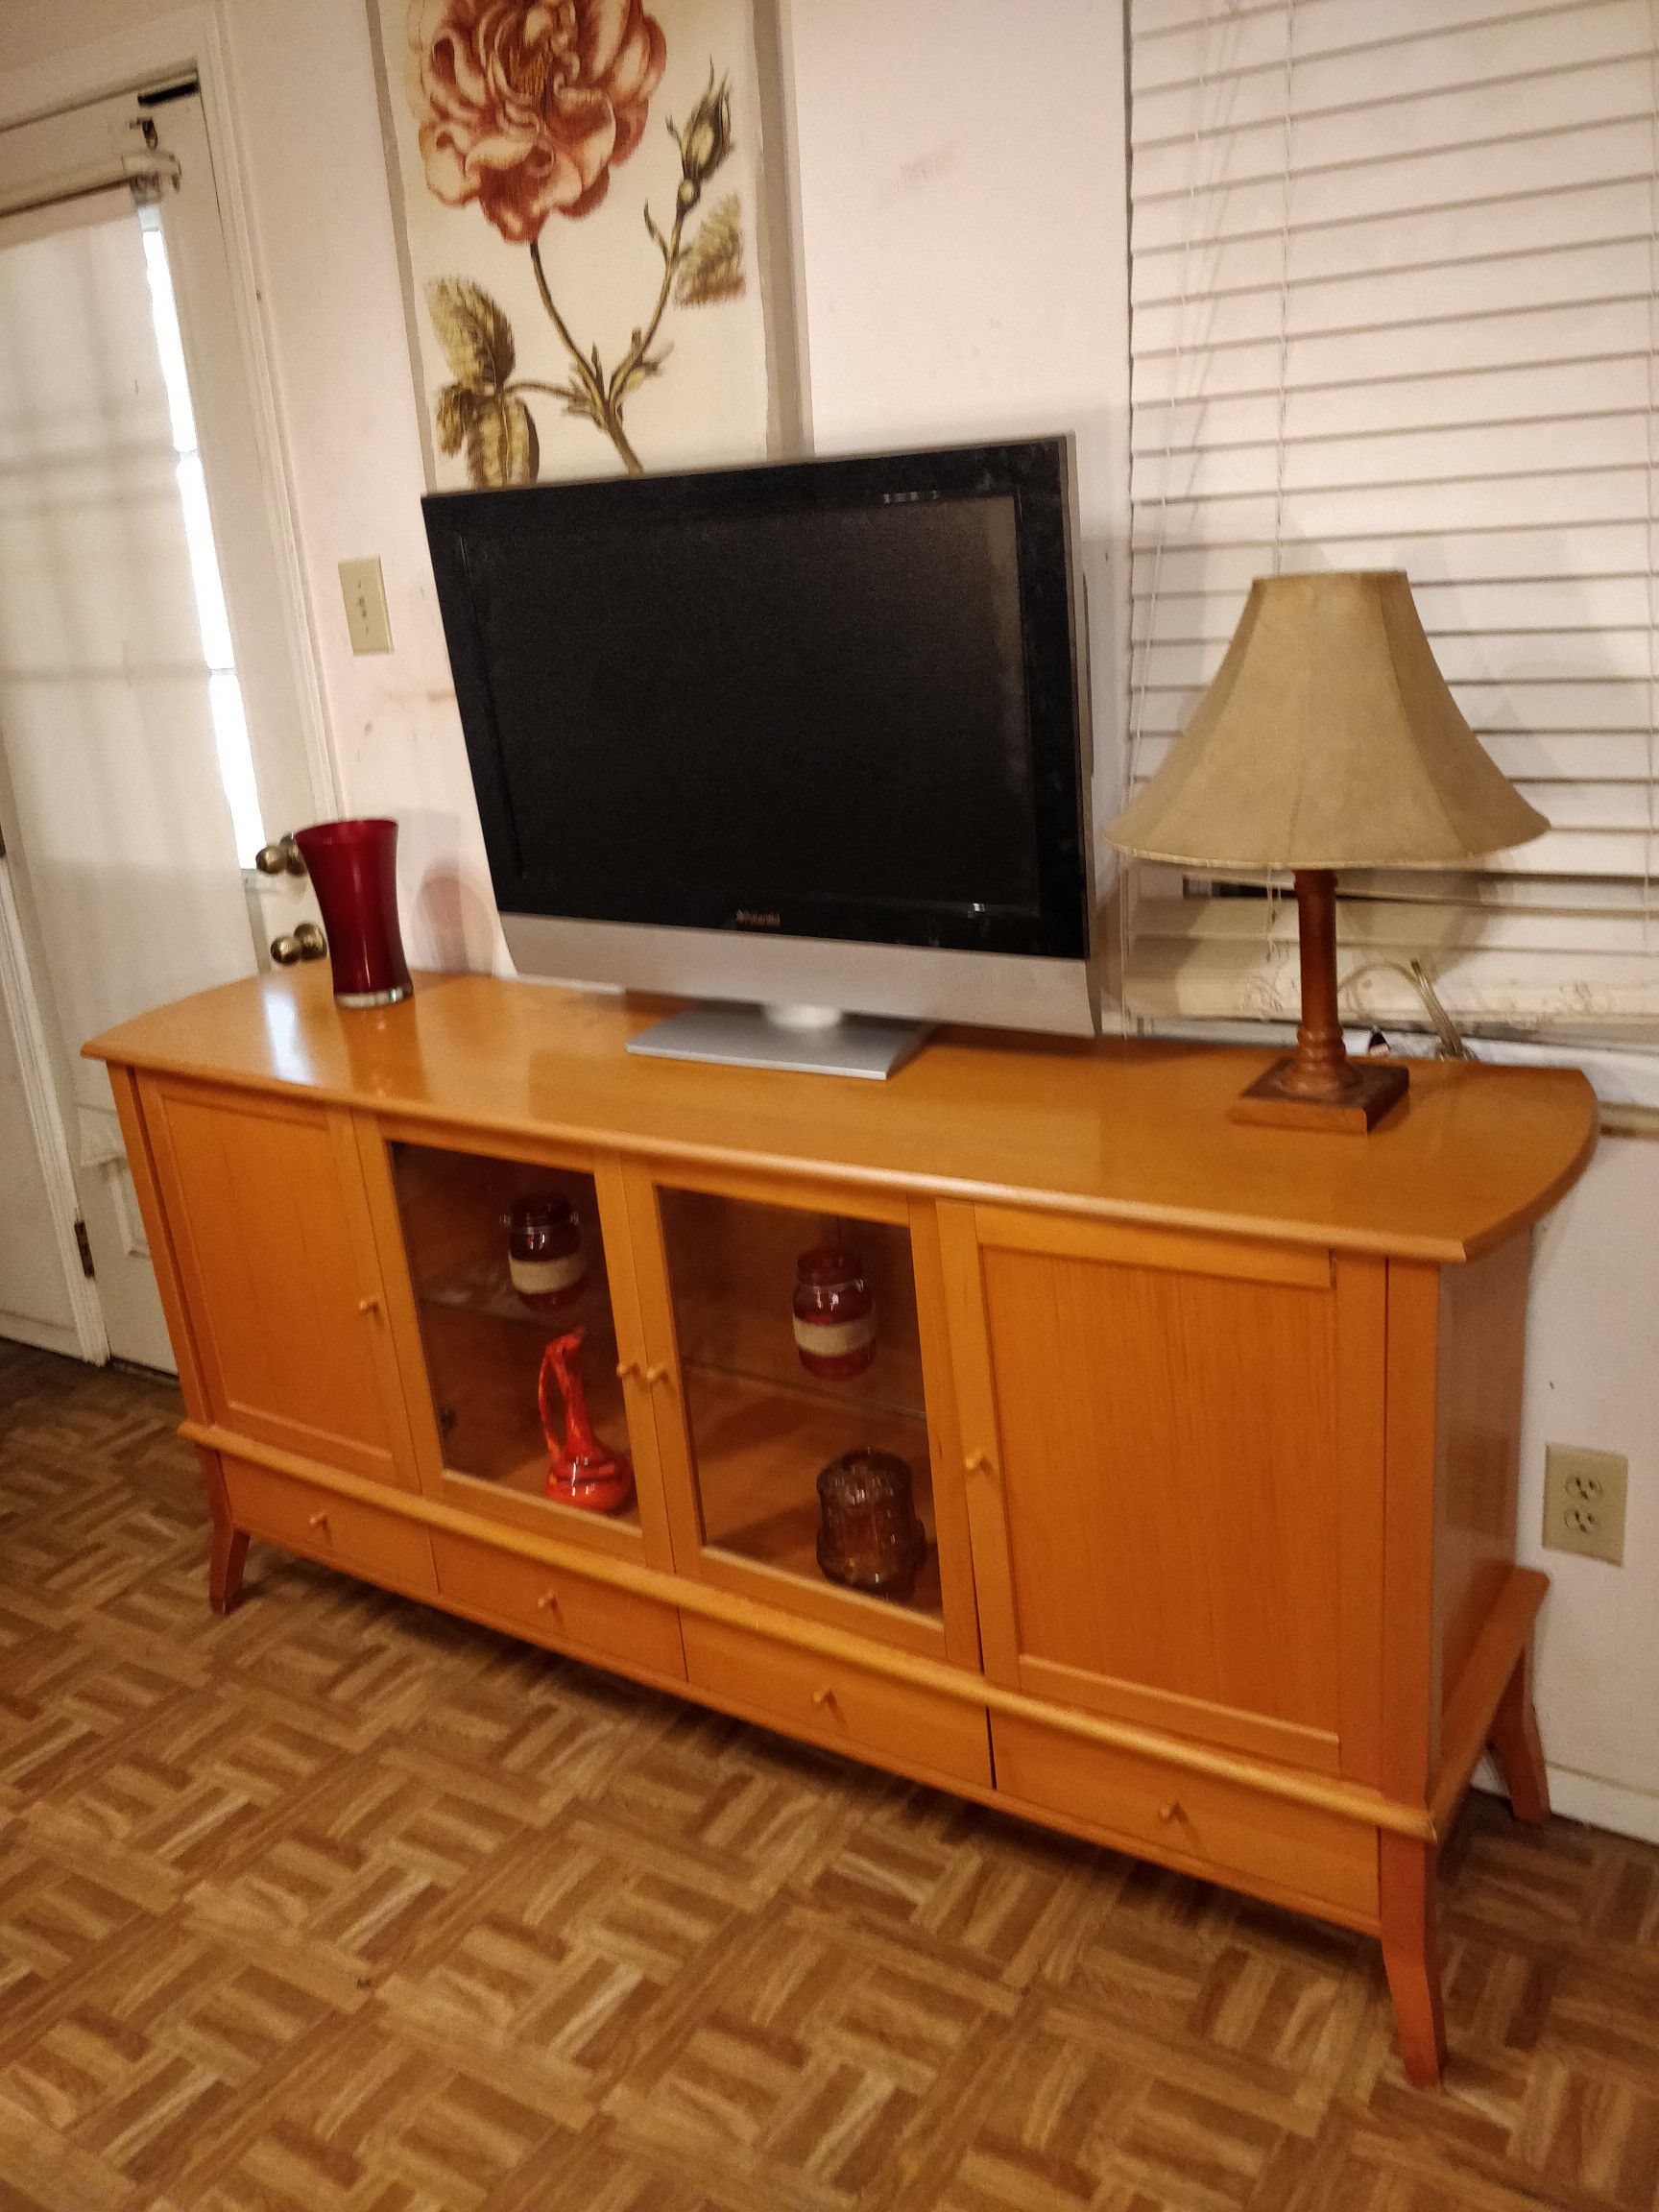 Nice wooden buffet/ TV stand for big TVs with 4 drawers, cabinets and glass shelves in very good condition, all drawers working well. L